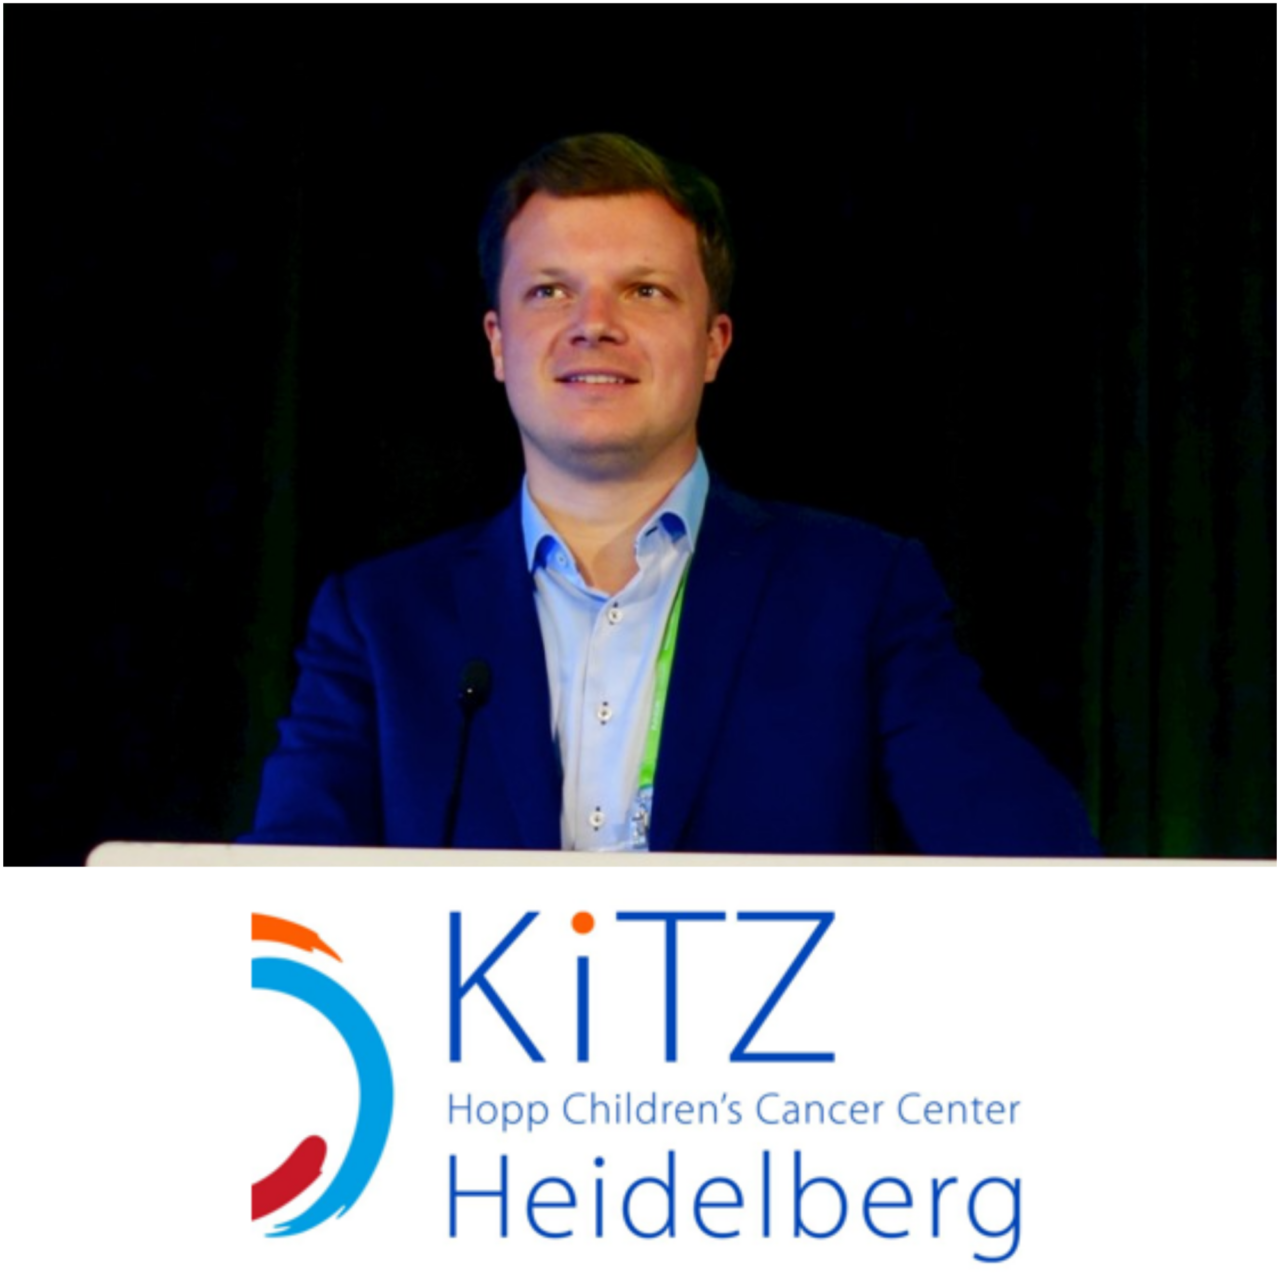 Christian Seitz: I have started my new position as Head of the SCT, Cell and Gene Therapy Program at KiTZ, Hopp Children’s Cancer Center